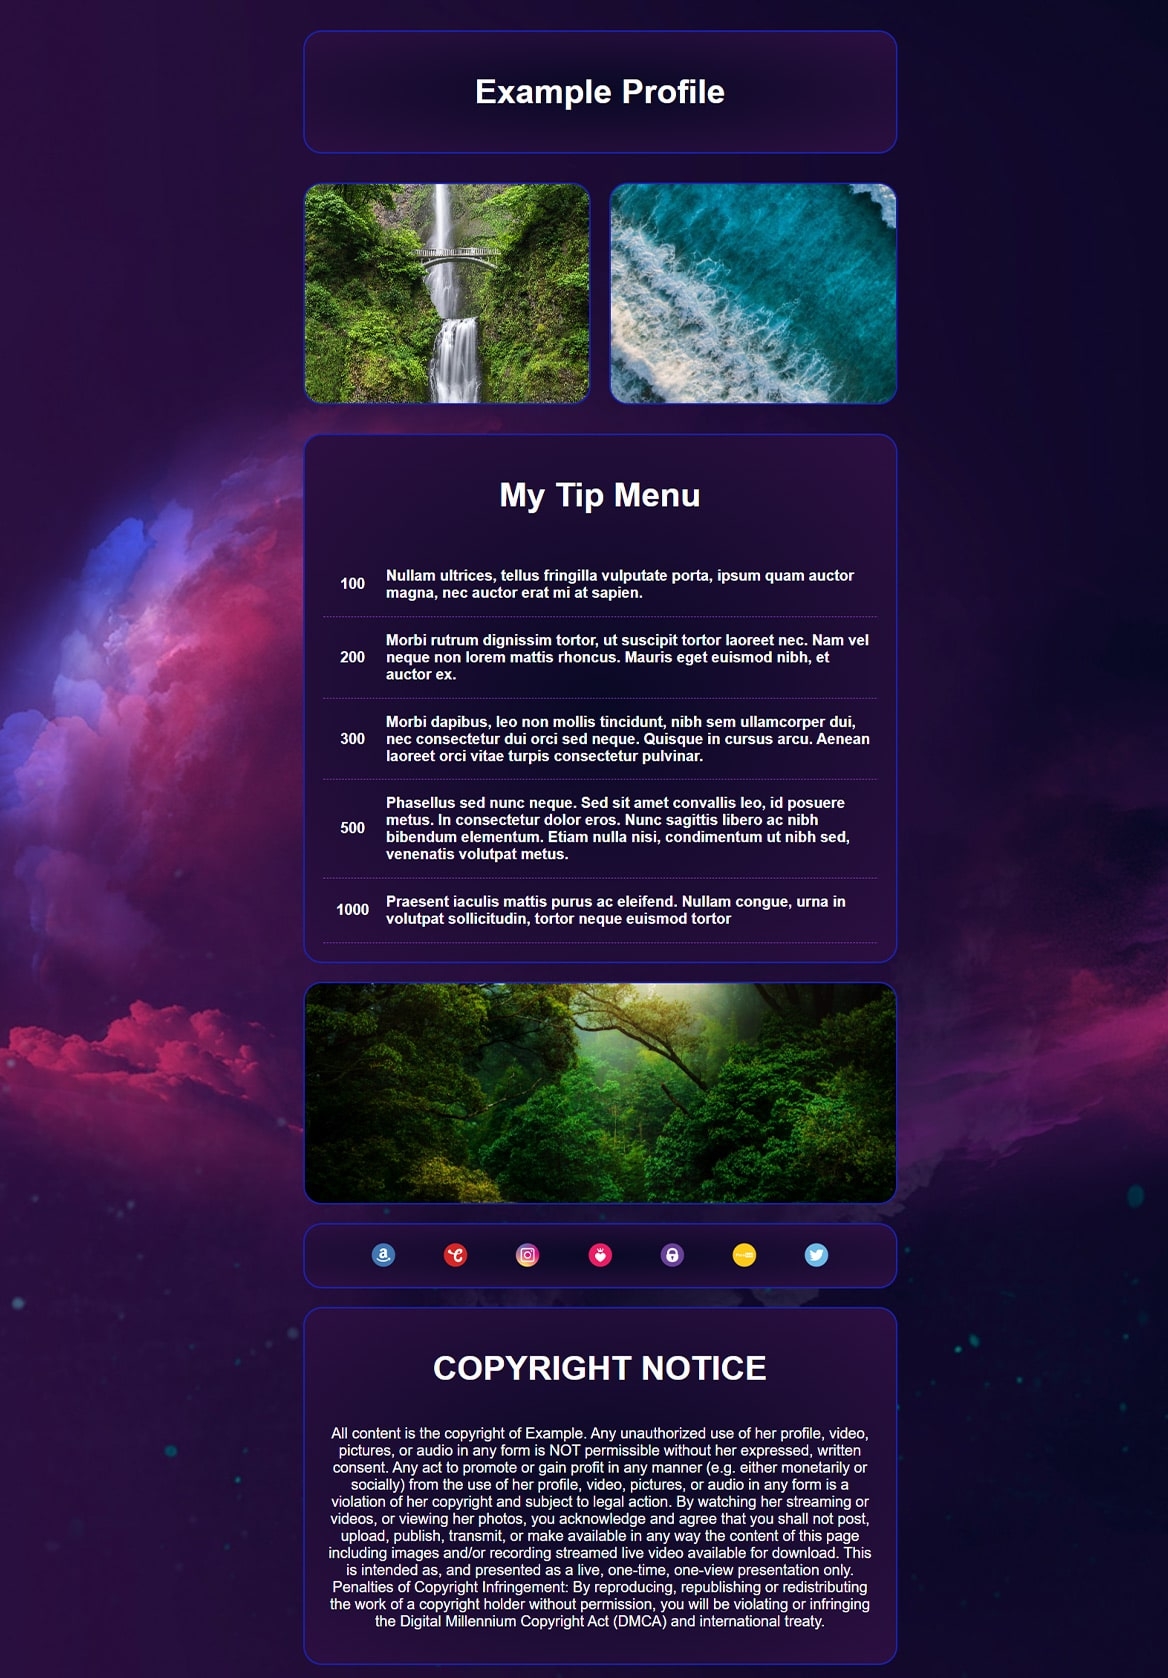 Purple Space theme with universe background